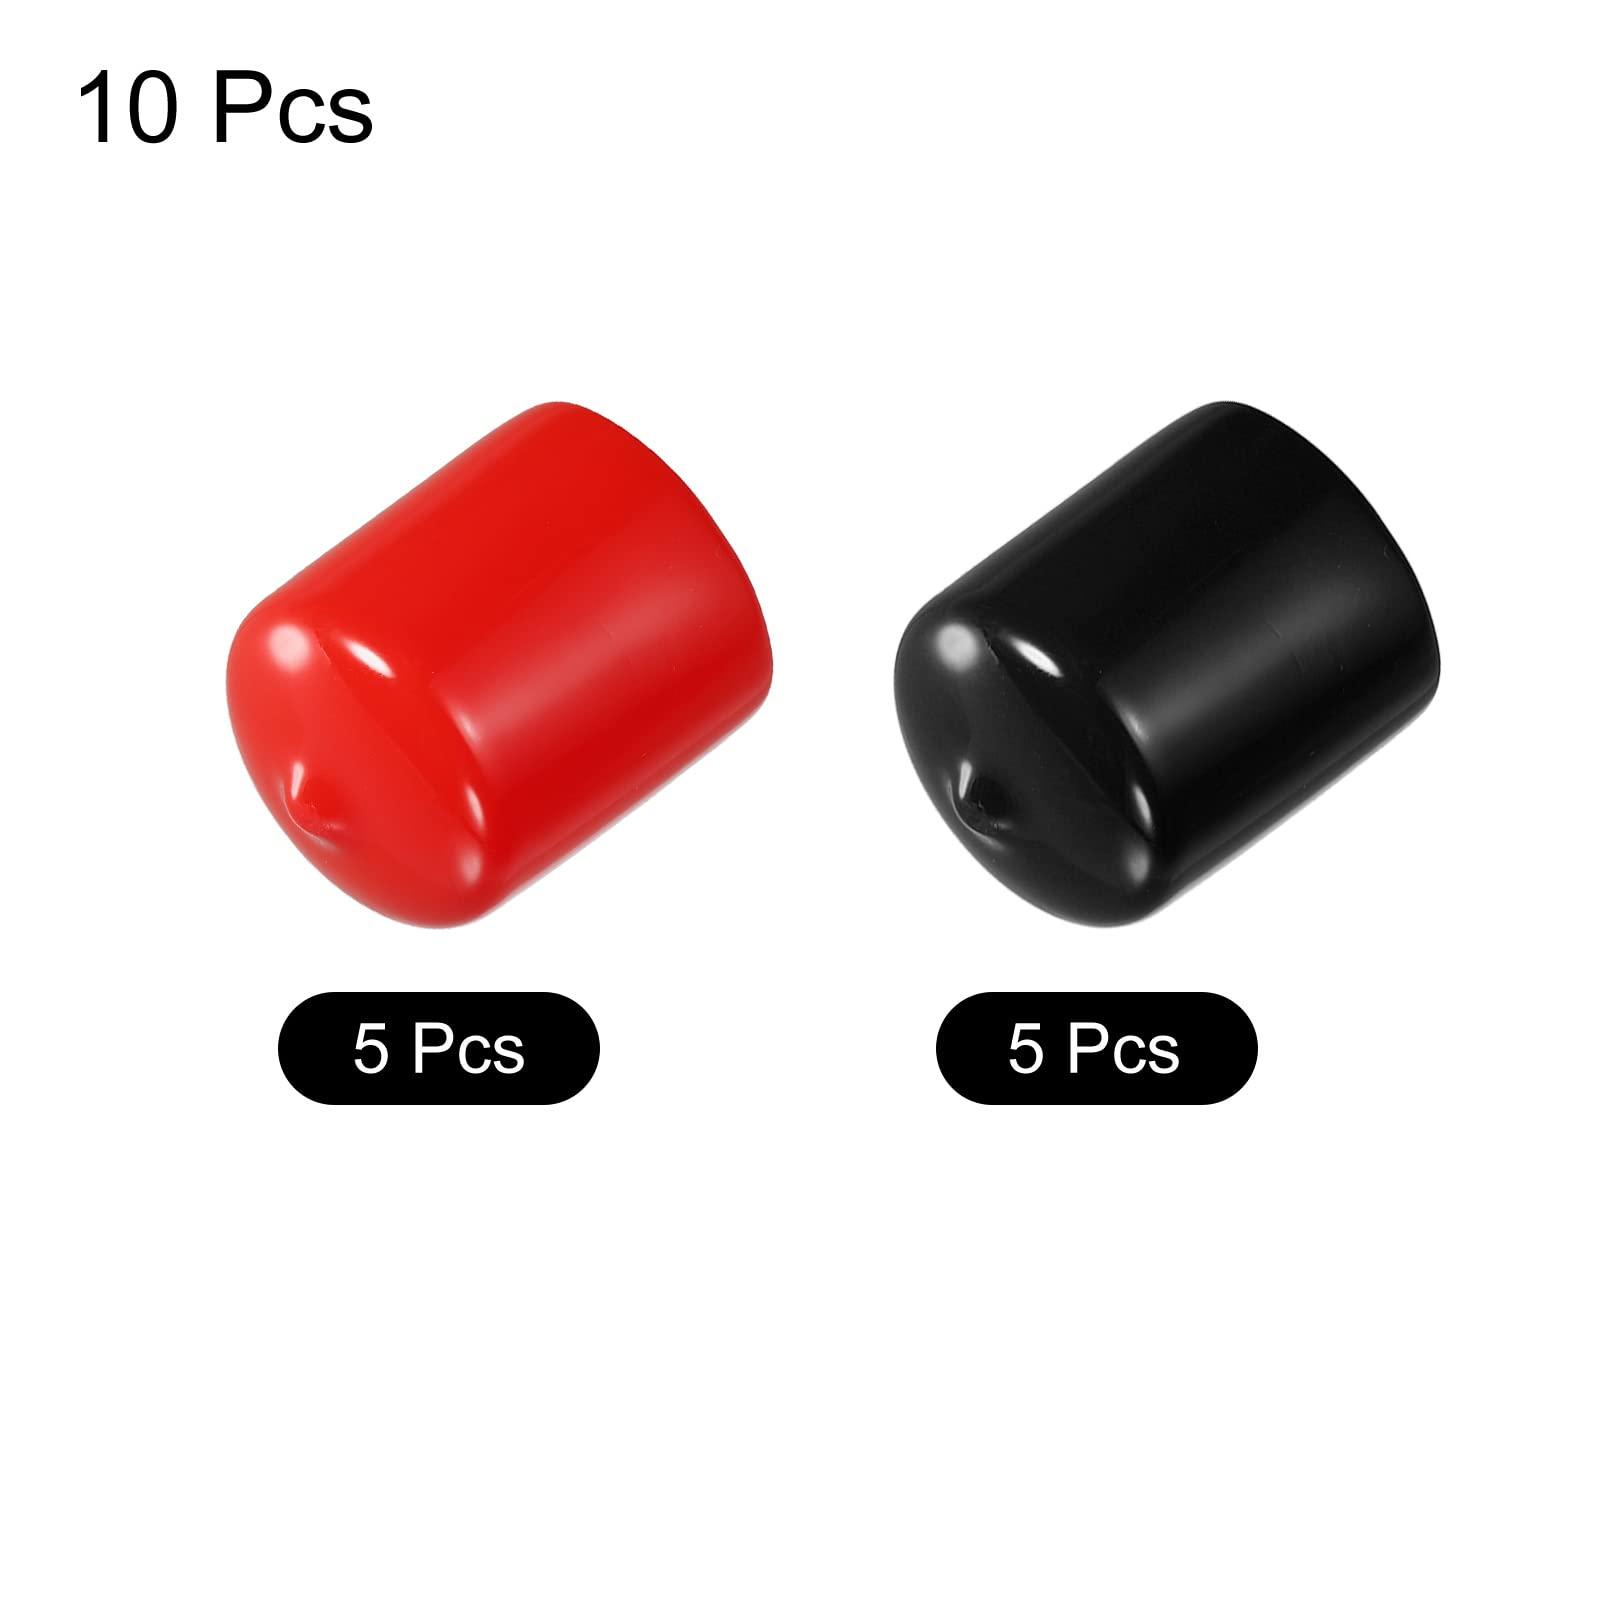 sourcing map 10pcs Rubber End Caps Cover Assortment 26mm PVC Vinyl Screw Thread Protector for Screw Bolt, Black Red 2